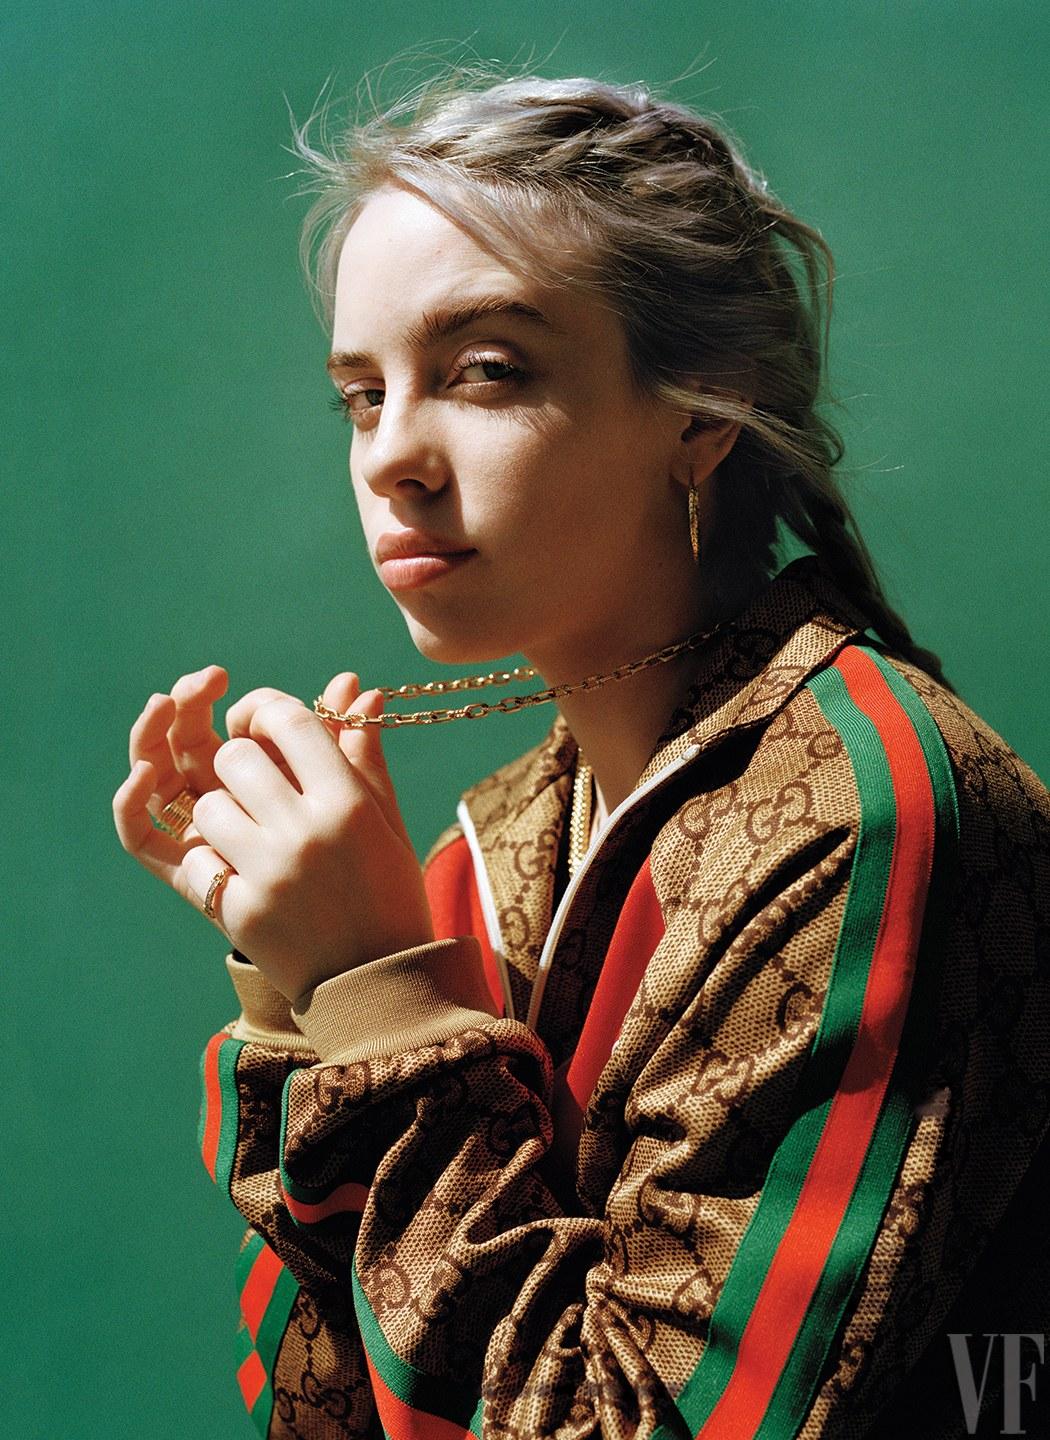 Billie Eilish: The Young Upstart With Co Signs From Lorde